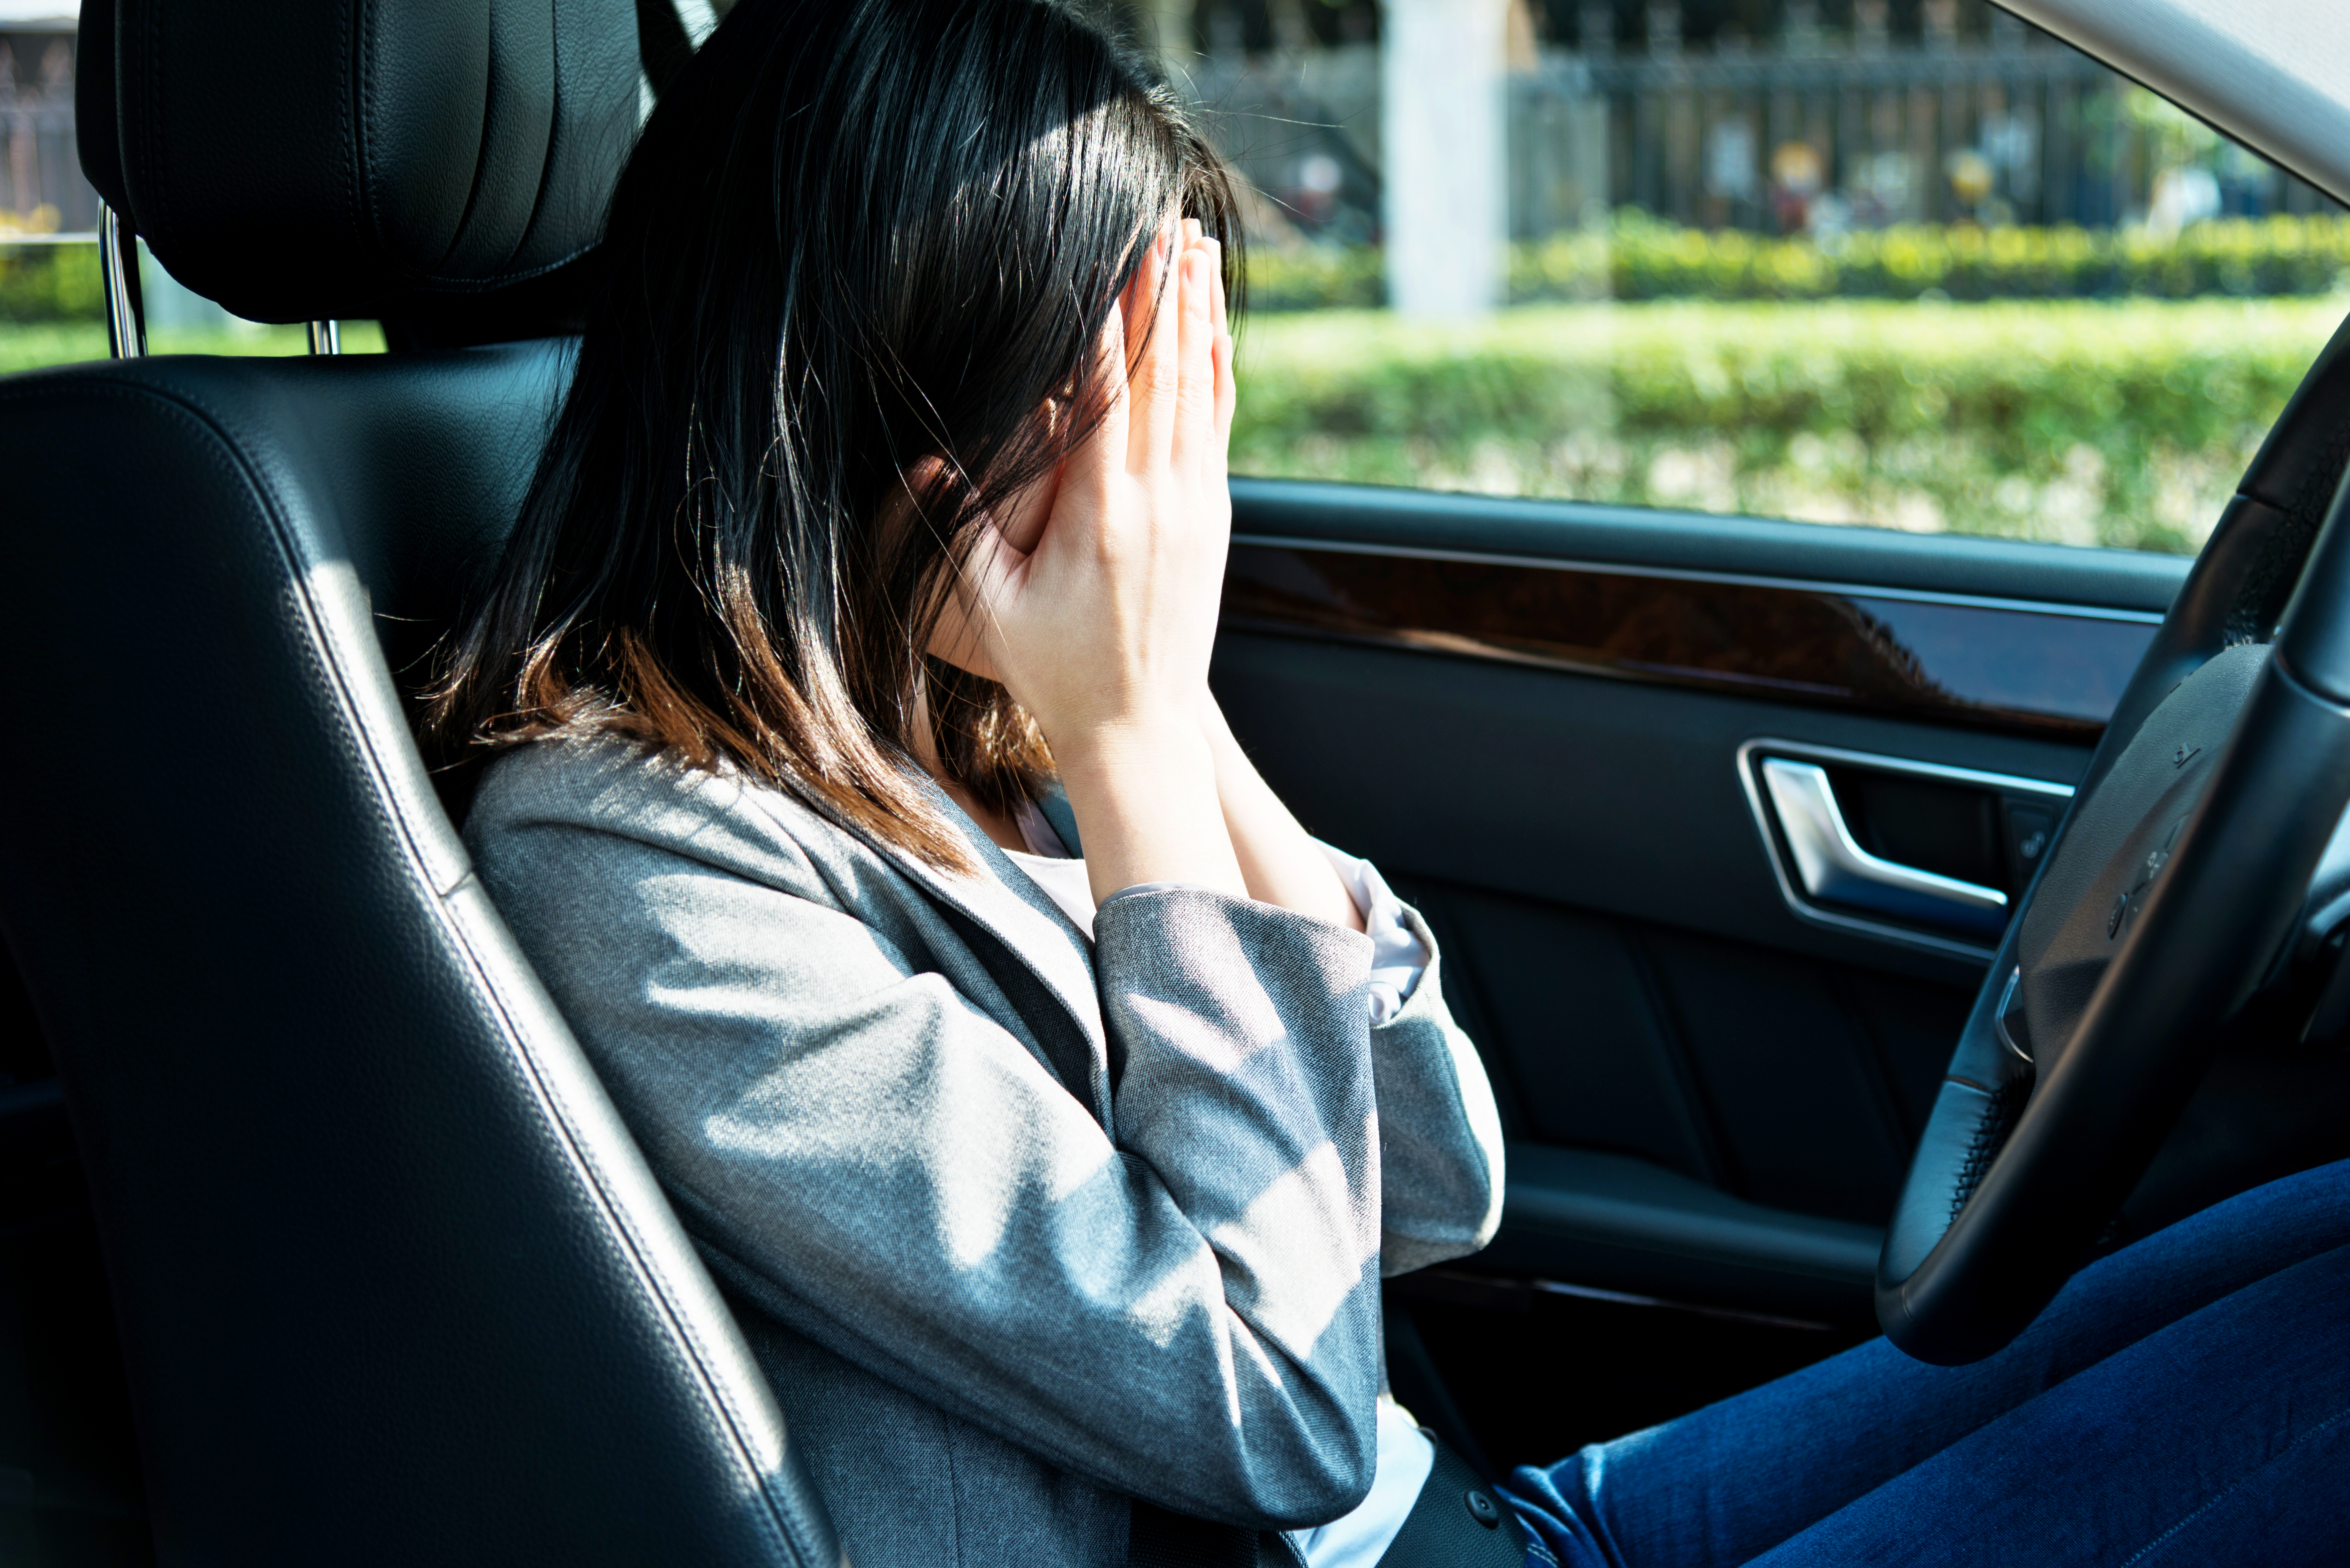 Sad businesswoman driver sitting in car | Source: Getty Images